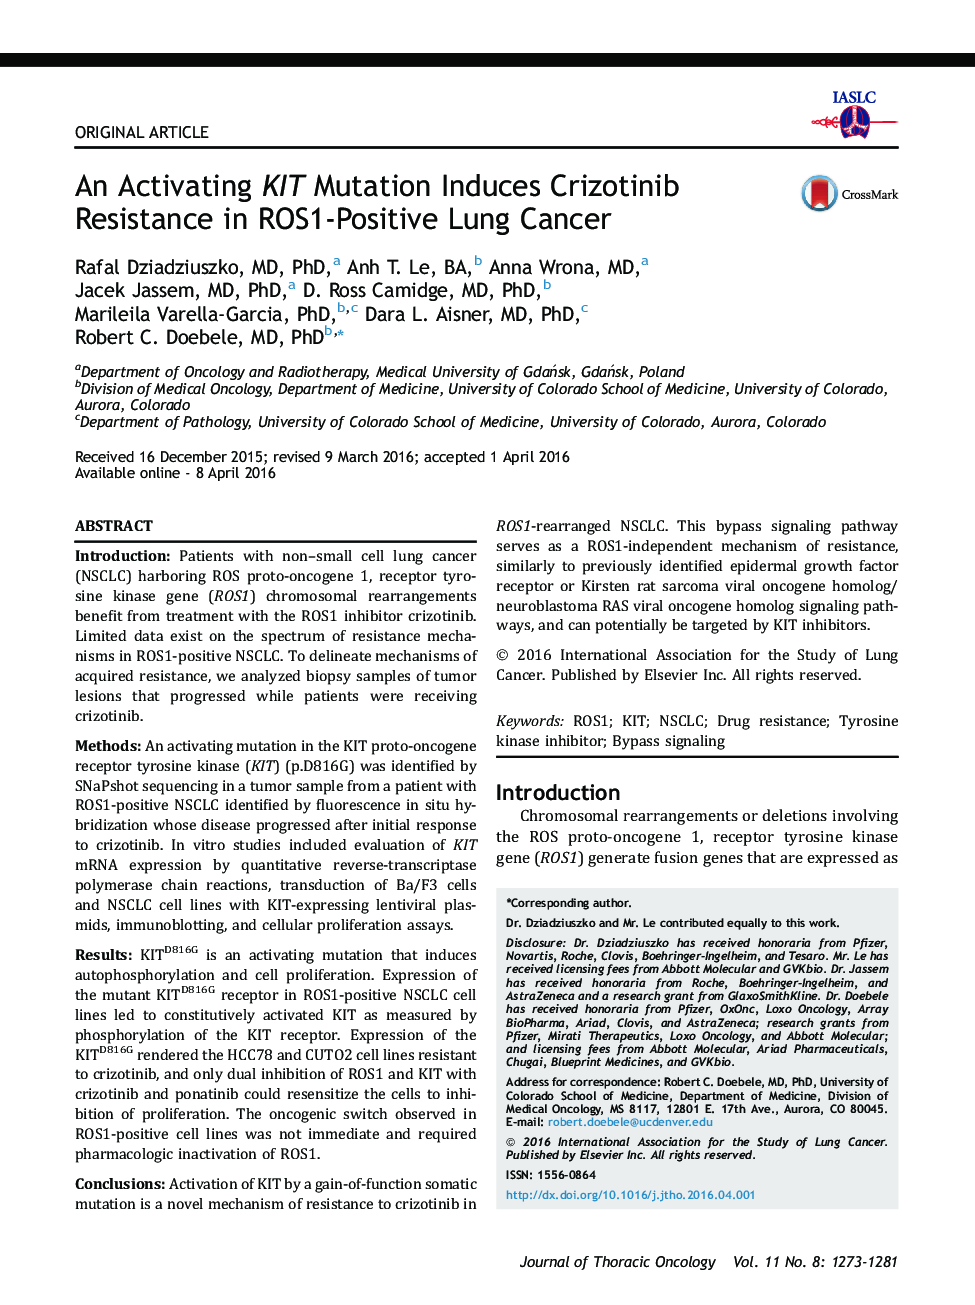 An Activating KIT Mutation Induces Crizotinib Resistance in ROS1-Positive Lung Cancer